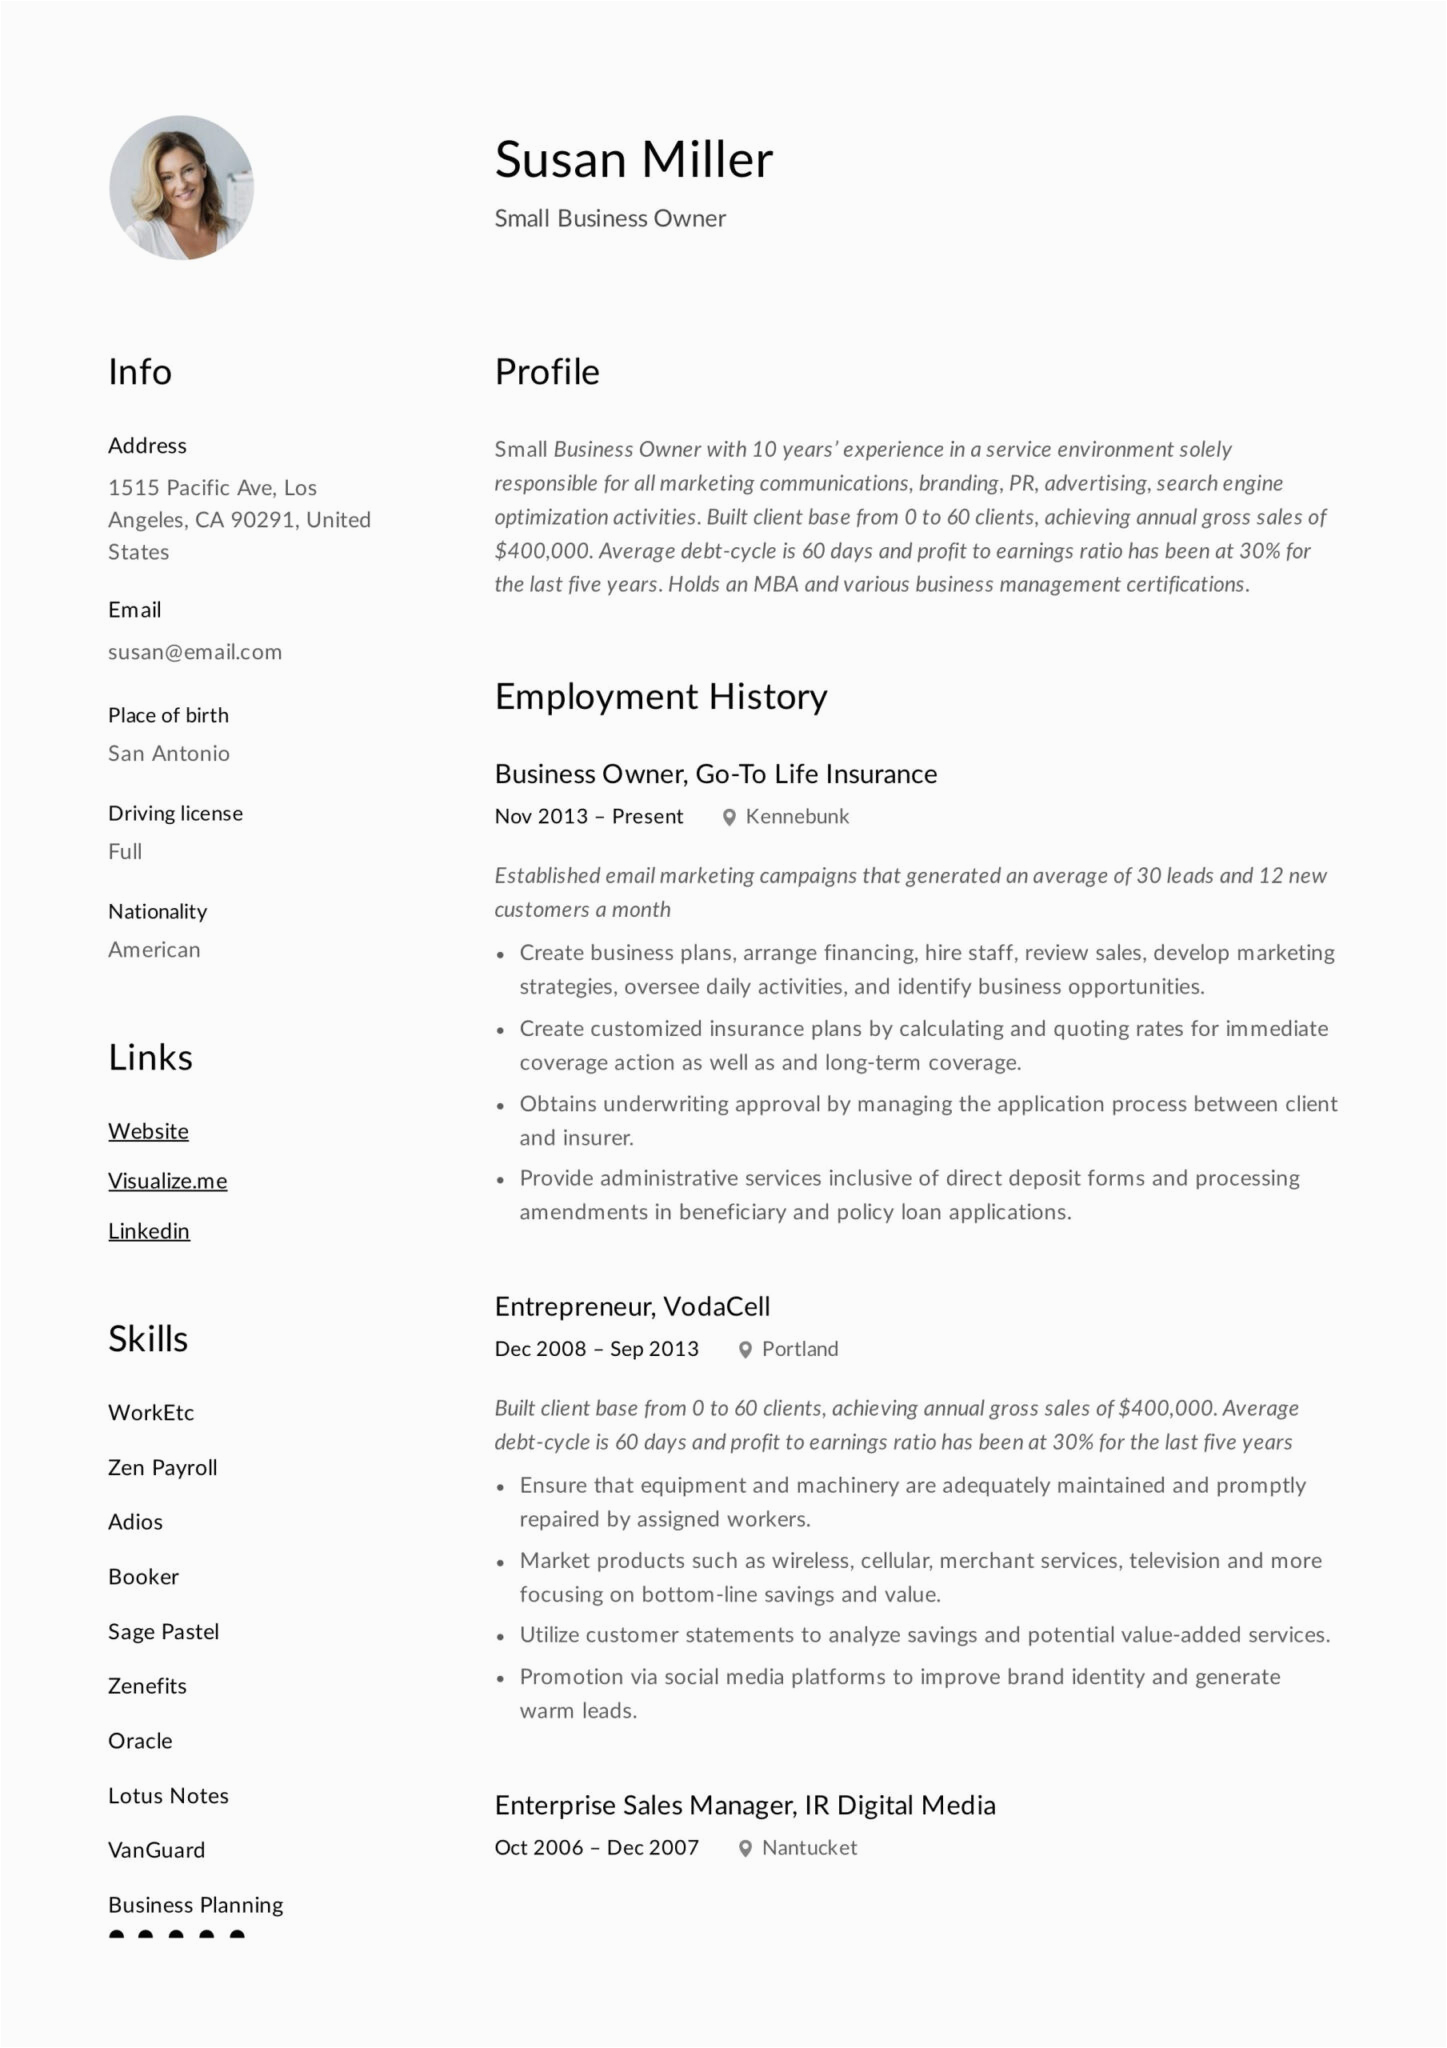 Resume Template for someone with Little Work Experience Sample Resume for someone with Little Work Experience